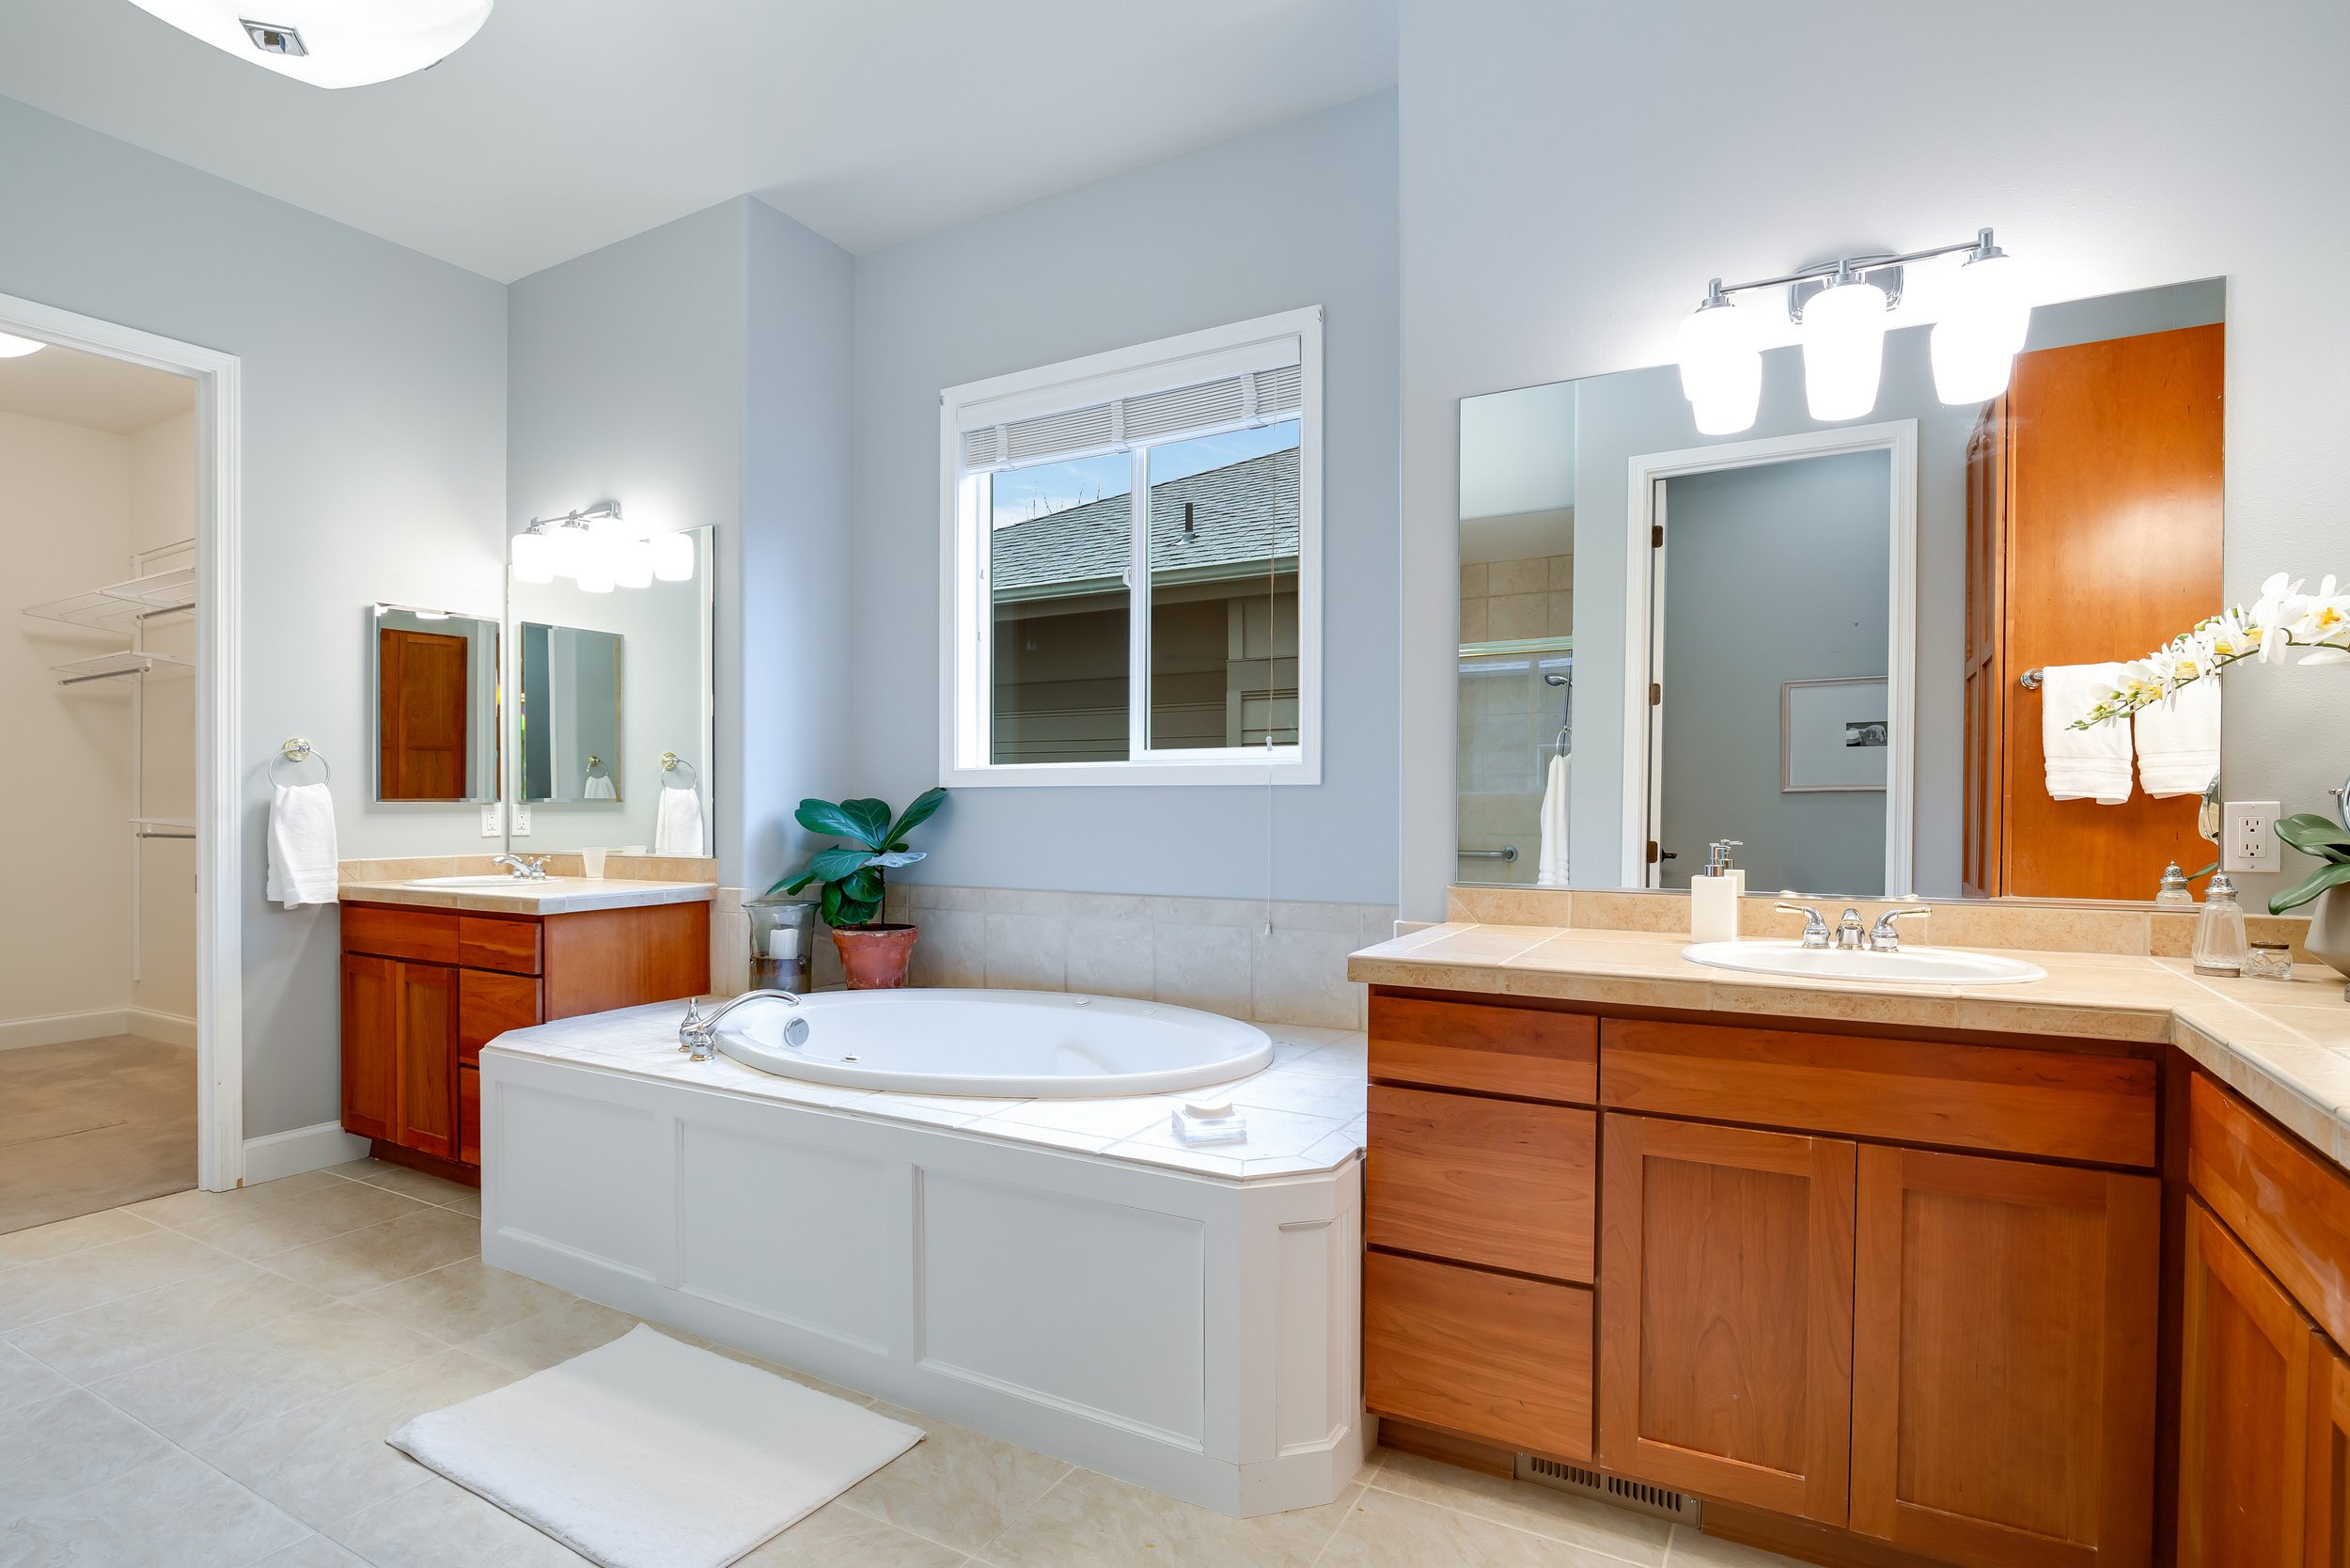  interior of master bathroom with large bathtub and walk in shower, window, and two sinks 